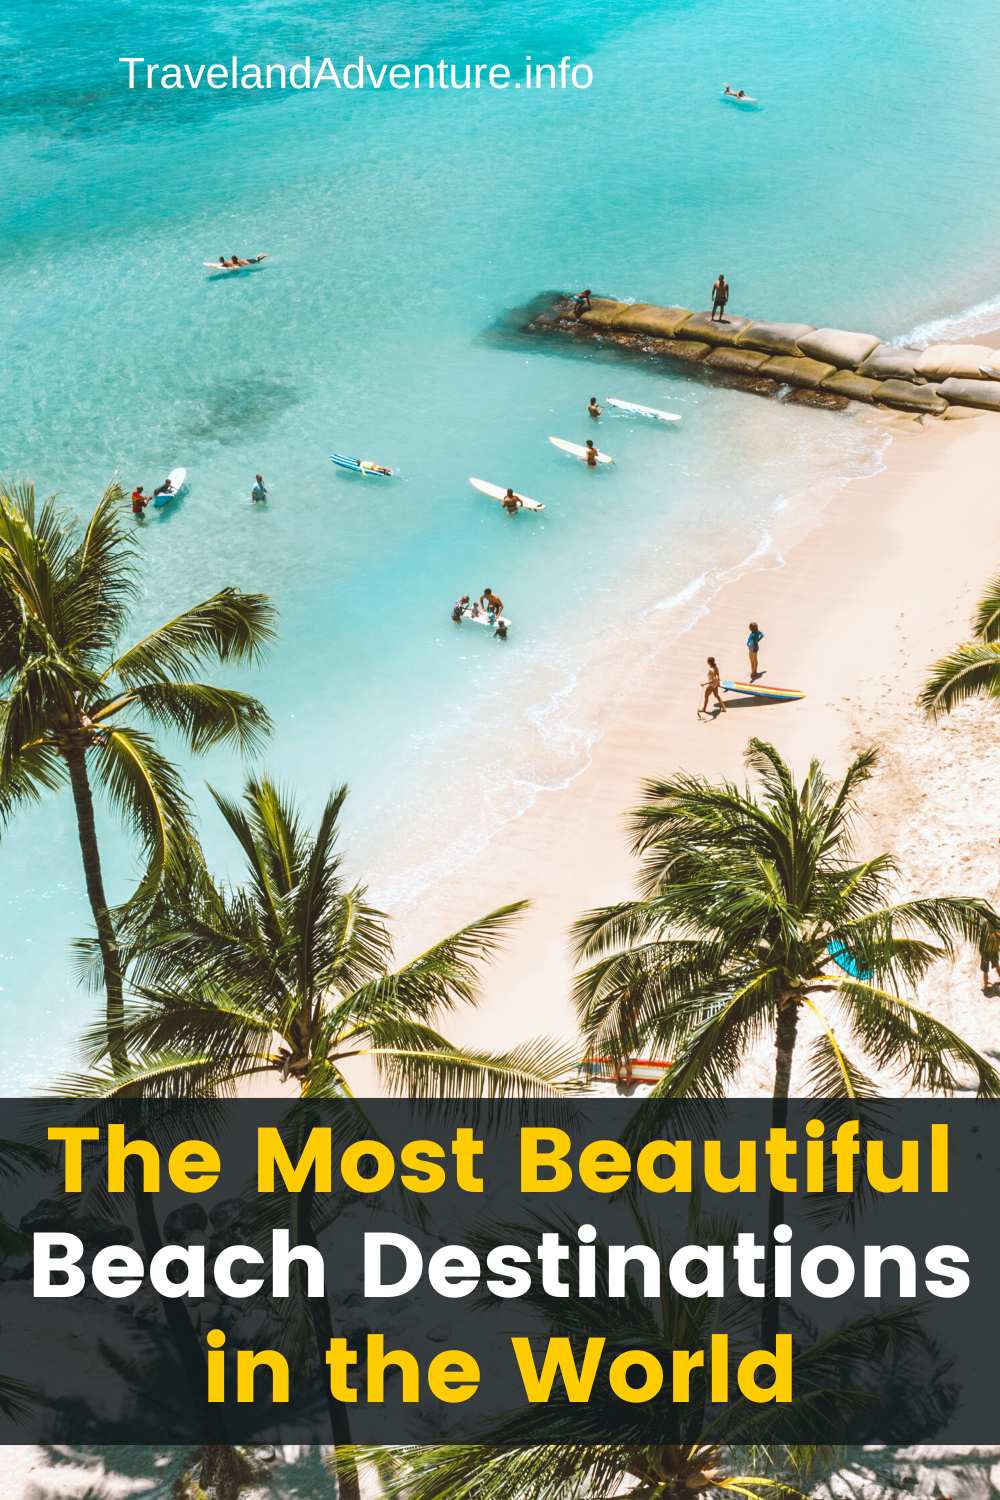 The Most Beautiful Beach Destinations in the World